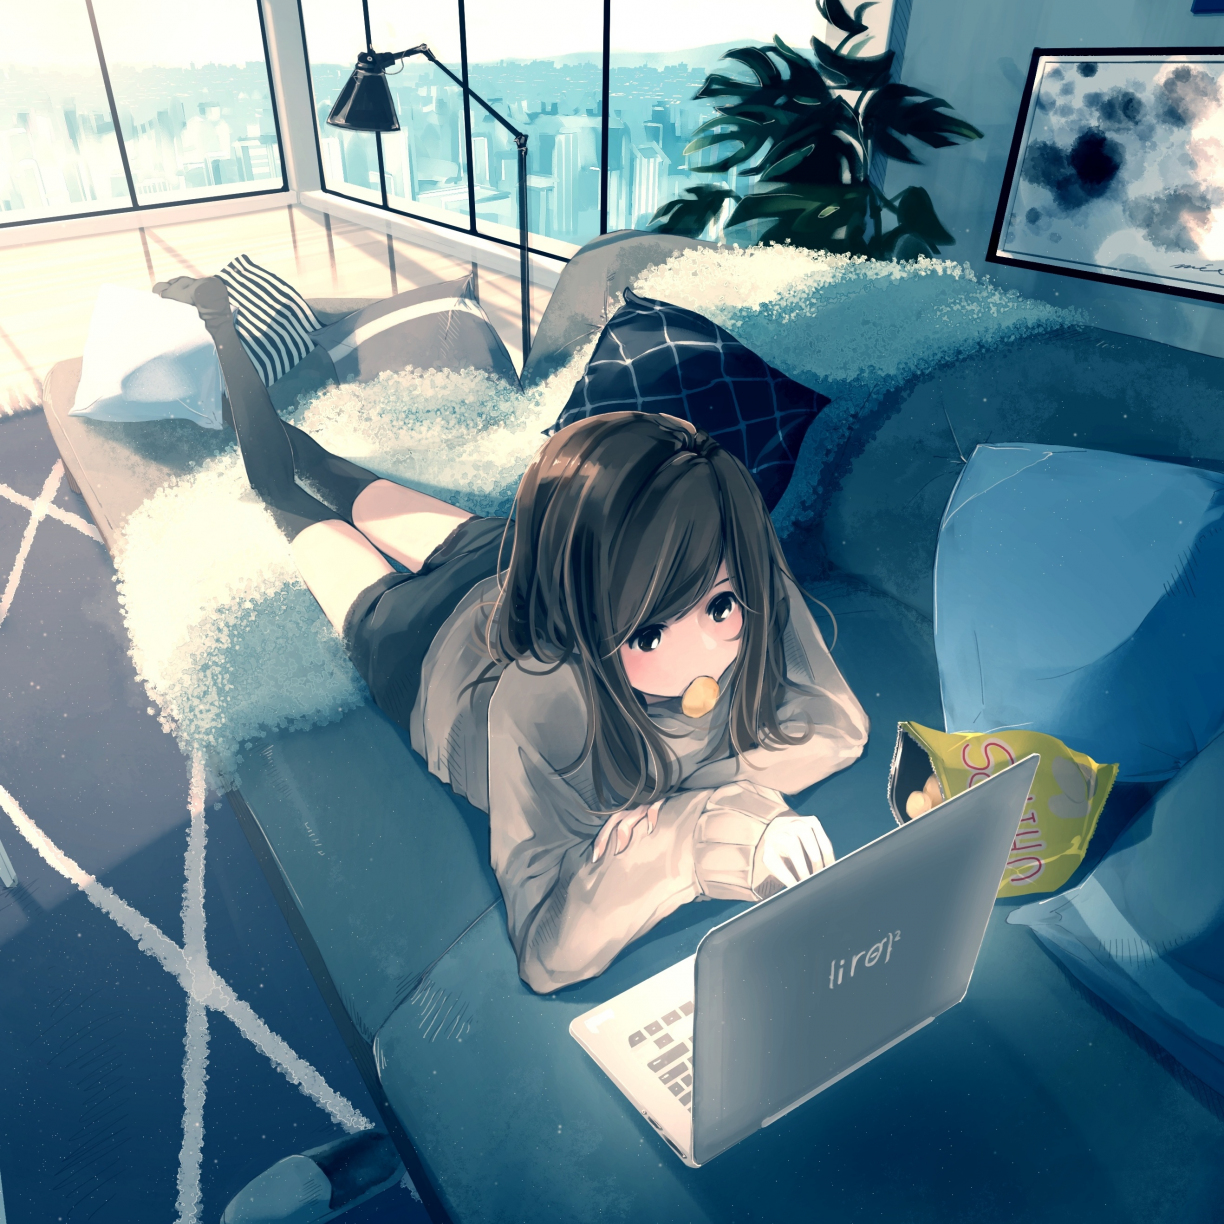 Small Laptop Workstation Anime Wallpapers